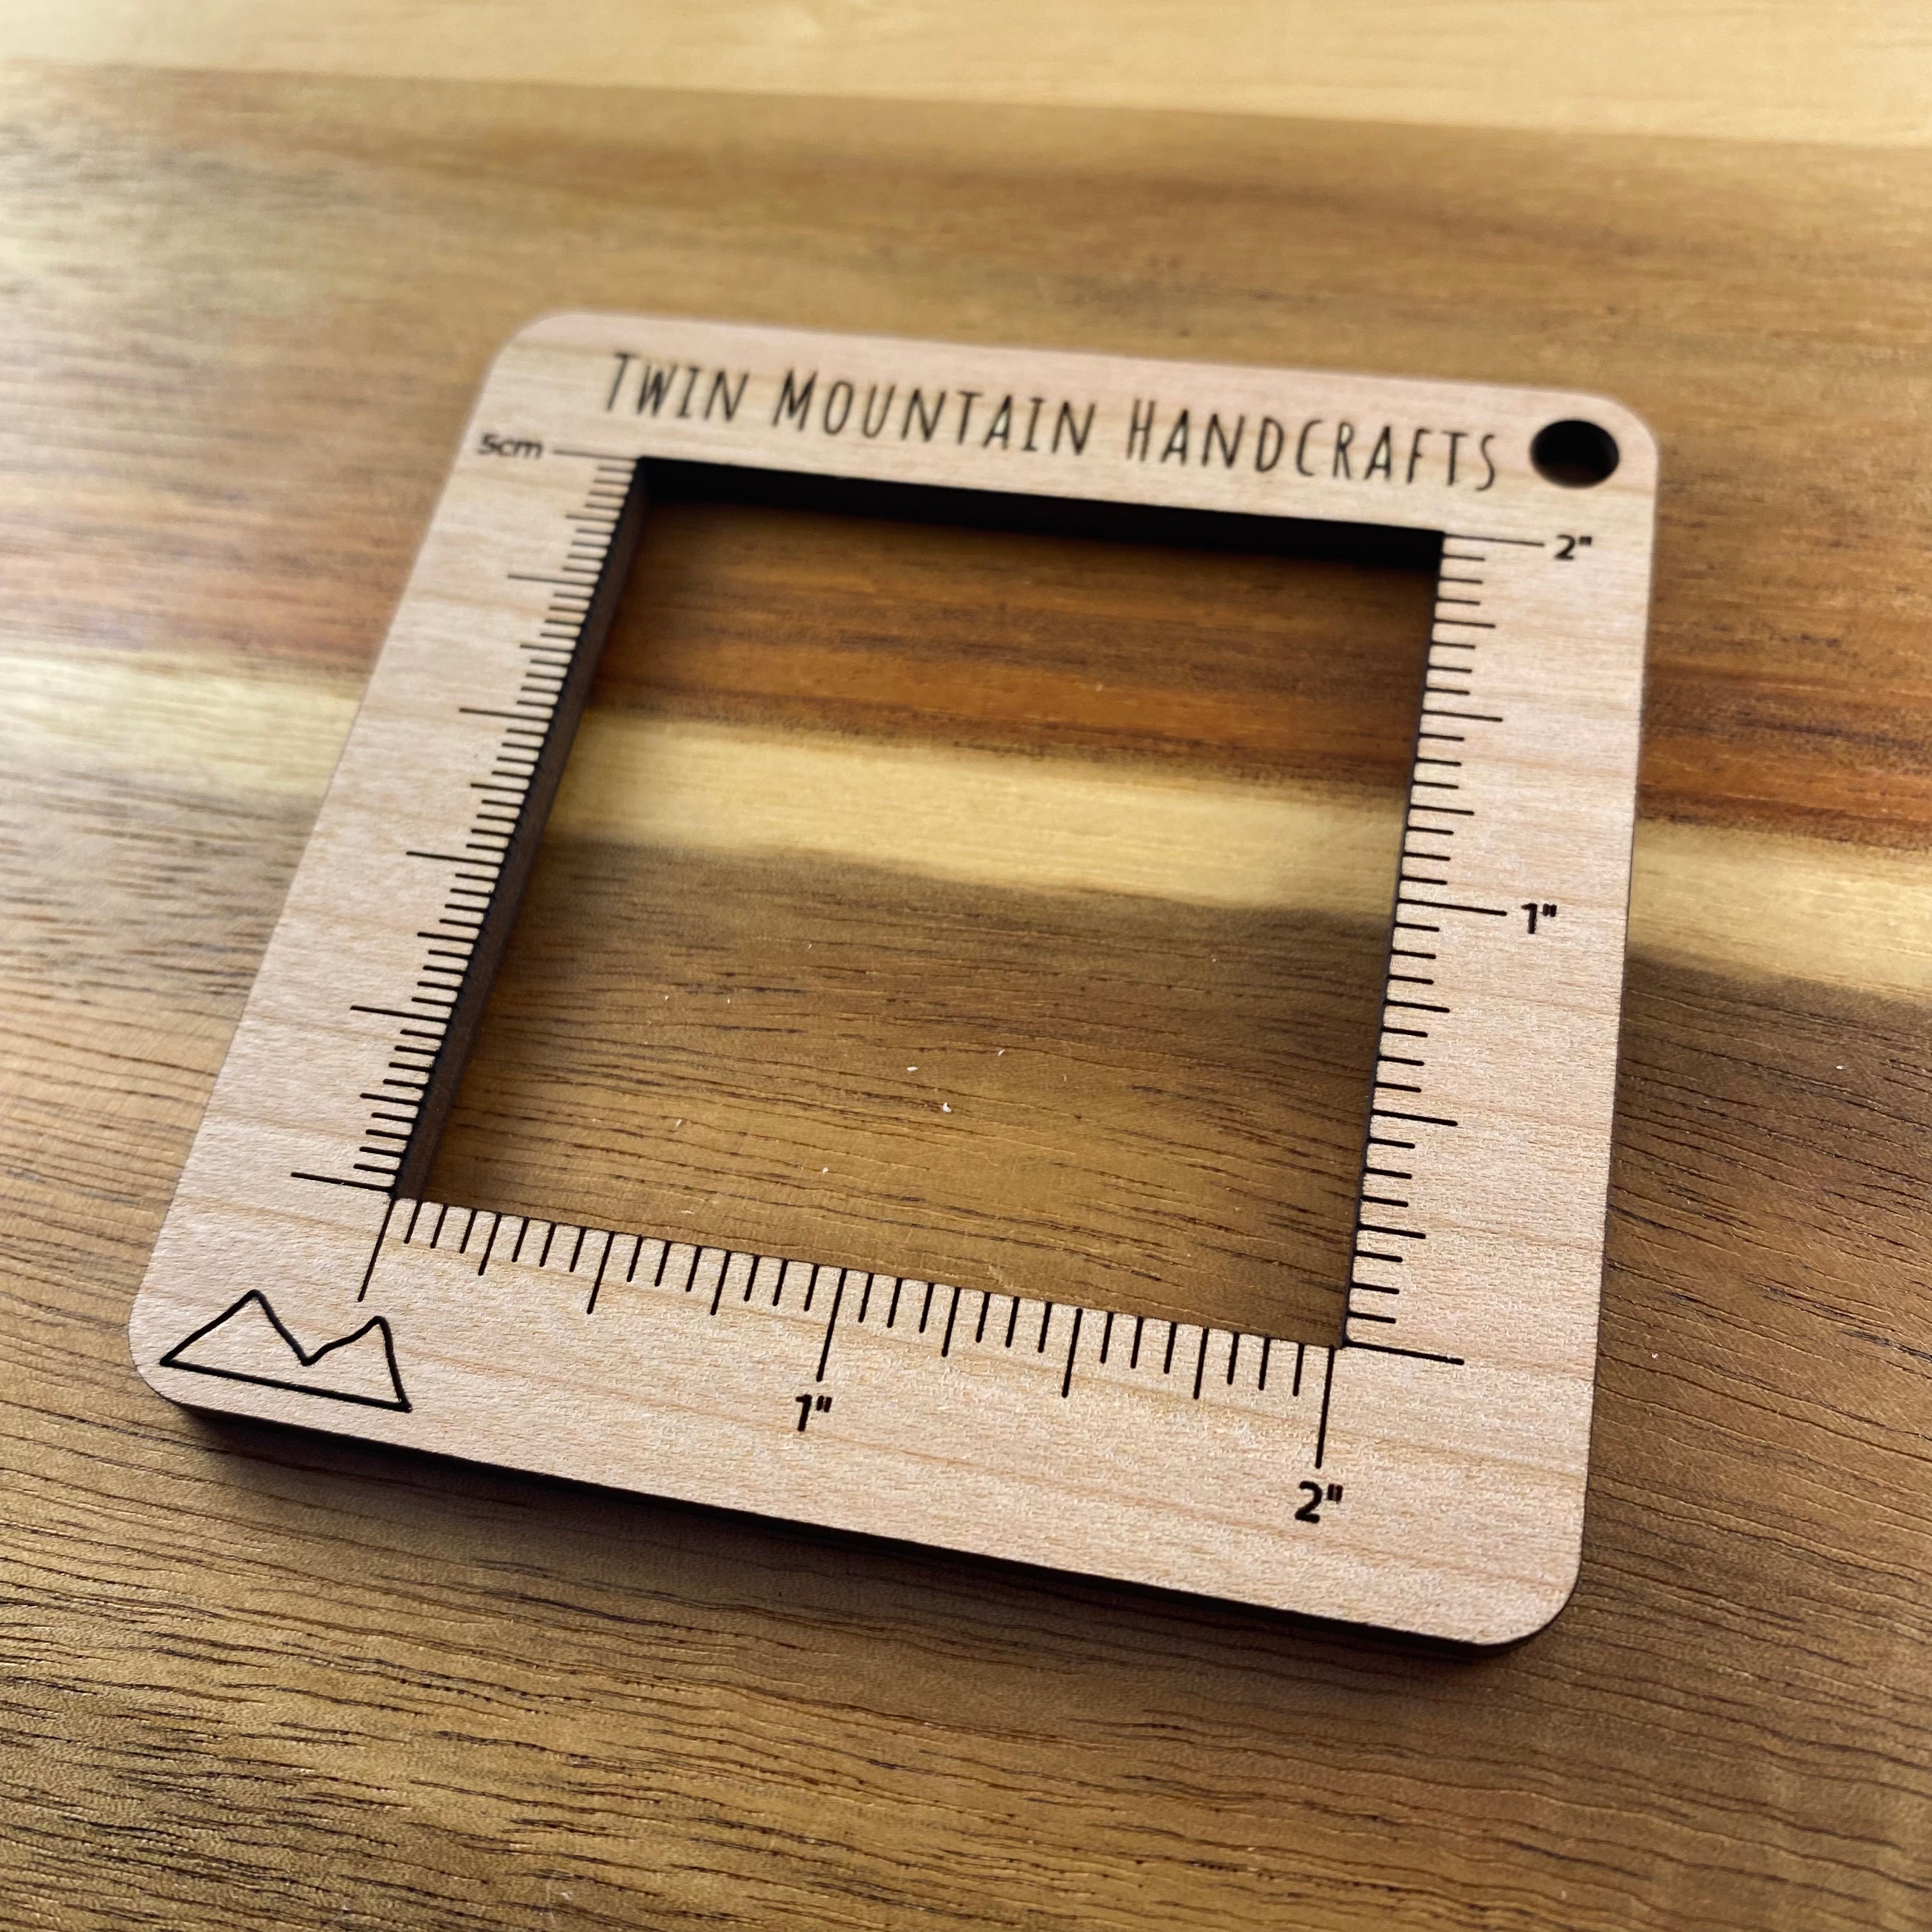 Wooden Swatch Ruler and Needle Gauge Tool (Metric and Imperial